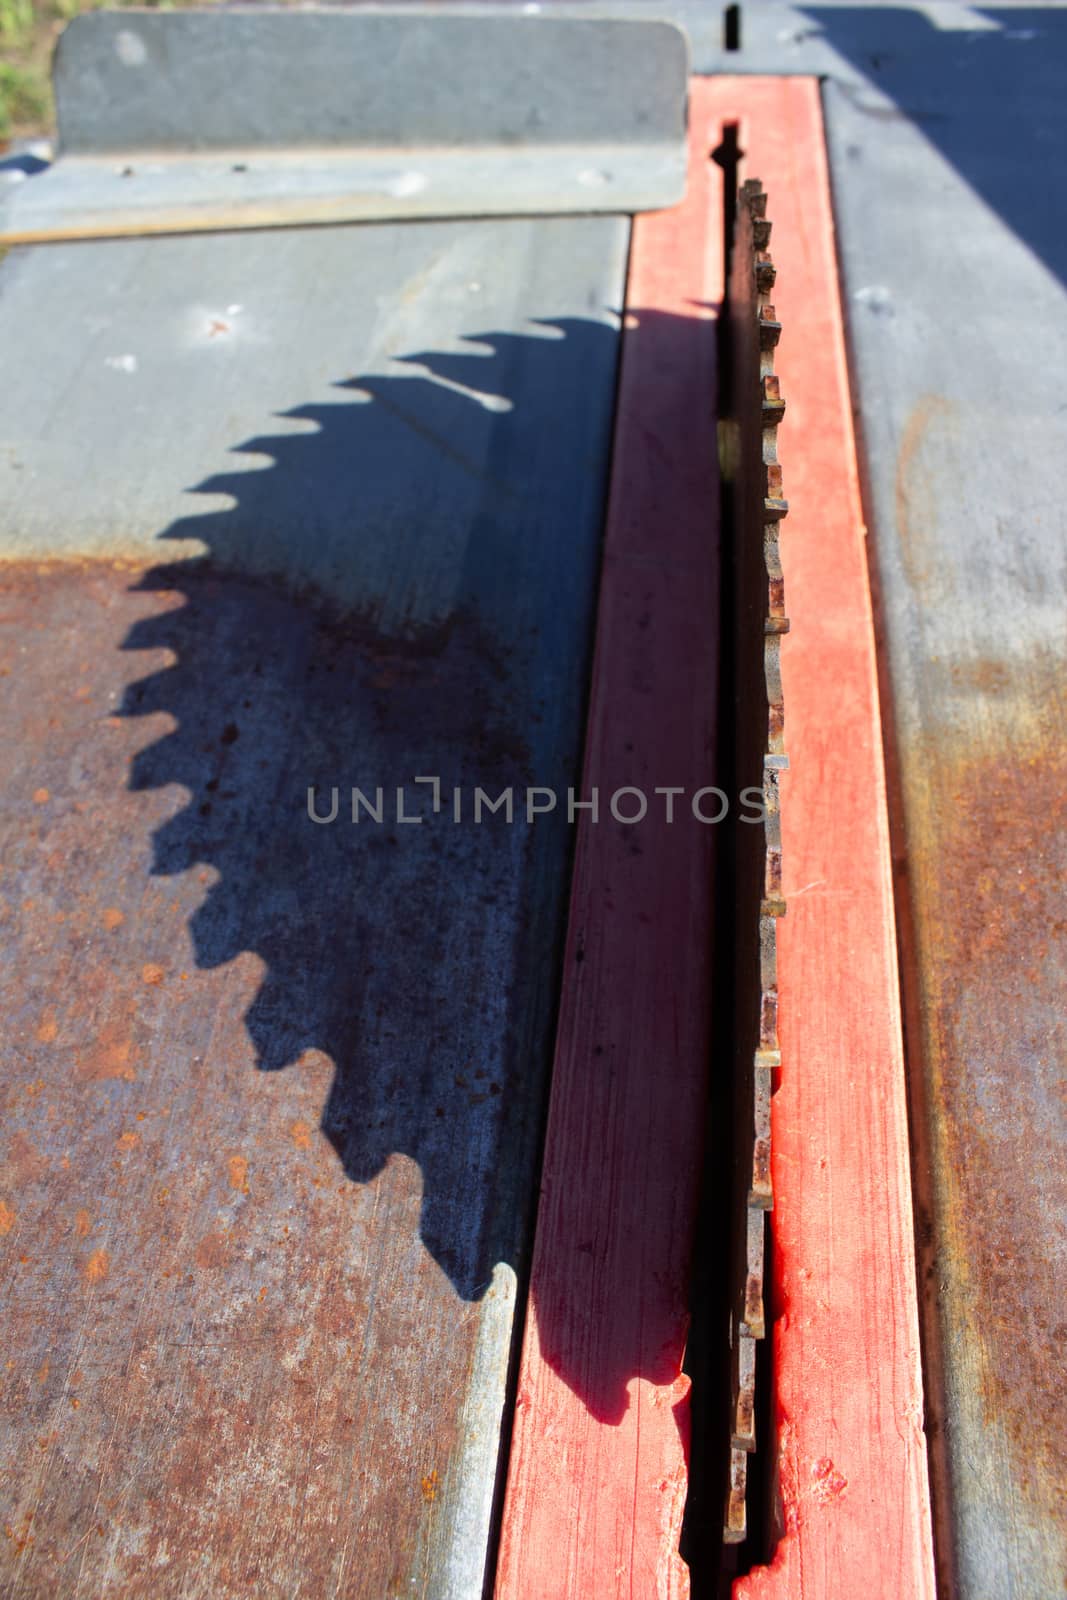 Round saw with teeth in the machine and its shadow.